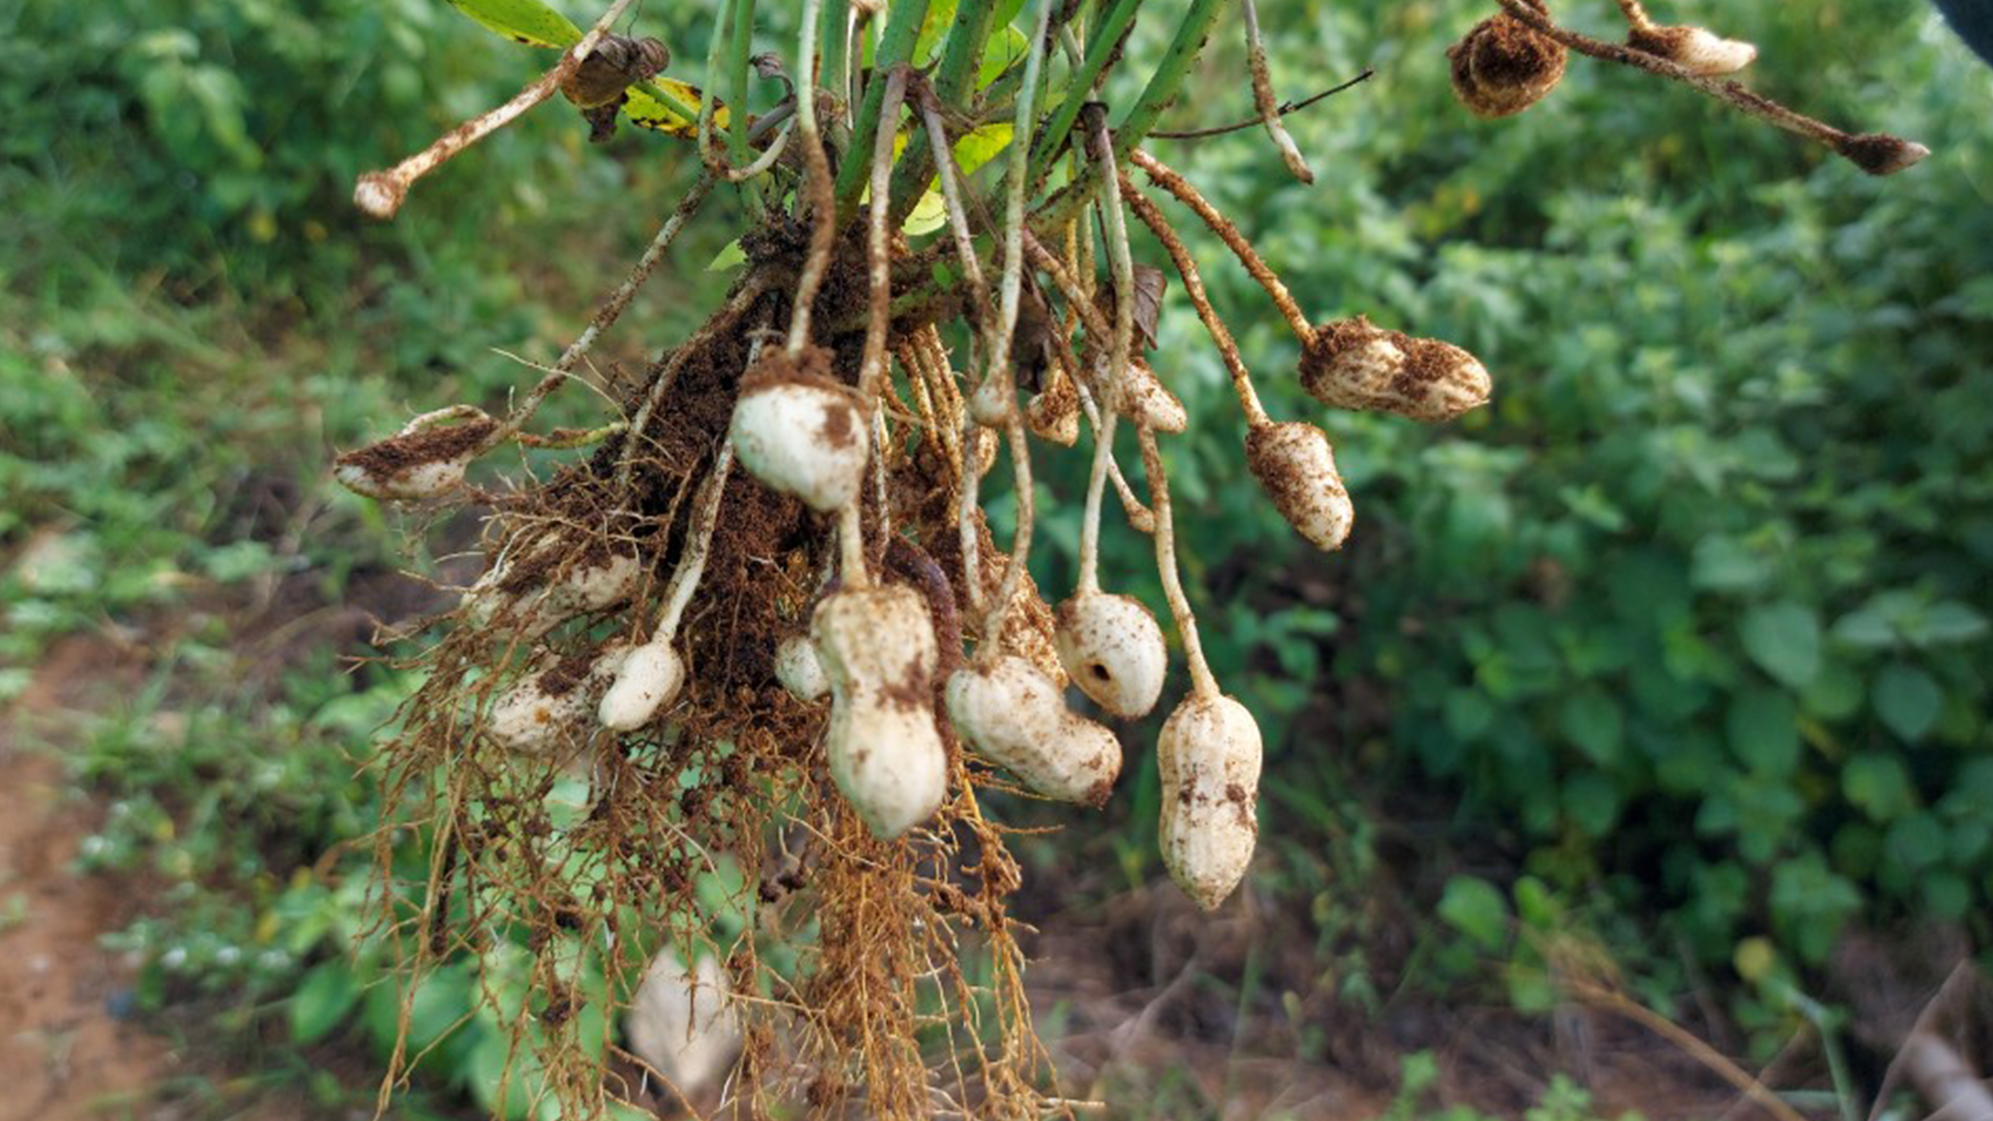 Growing Peanuts with Seawater? - Seawater Solutions